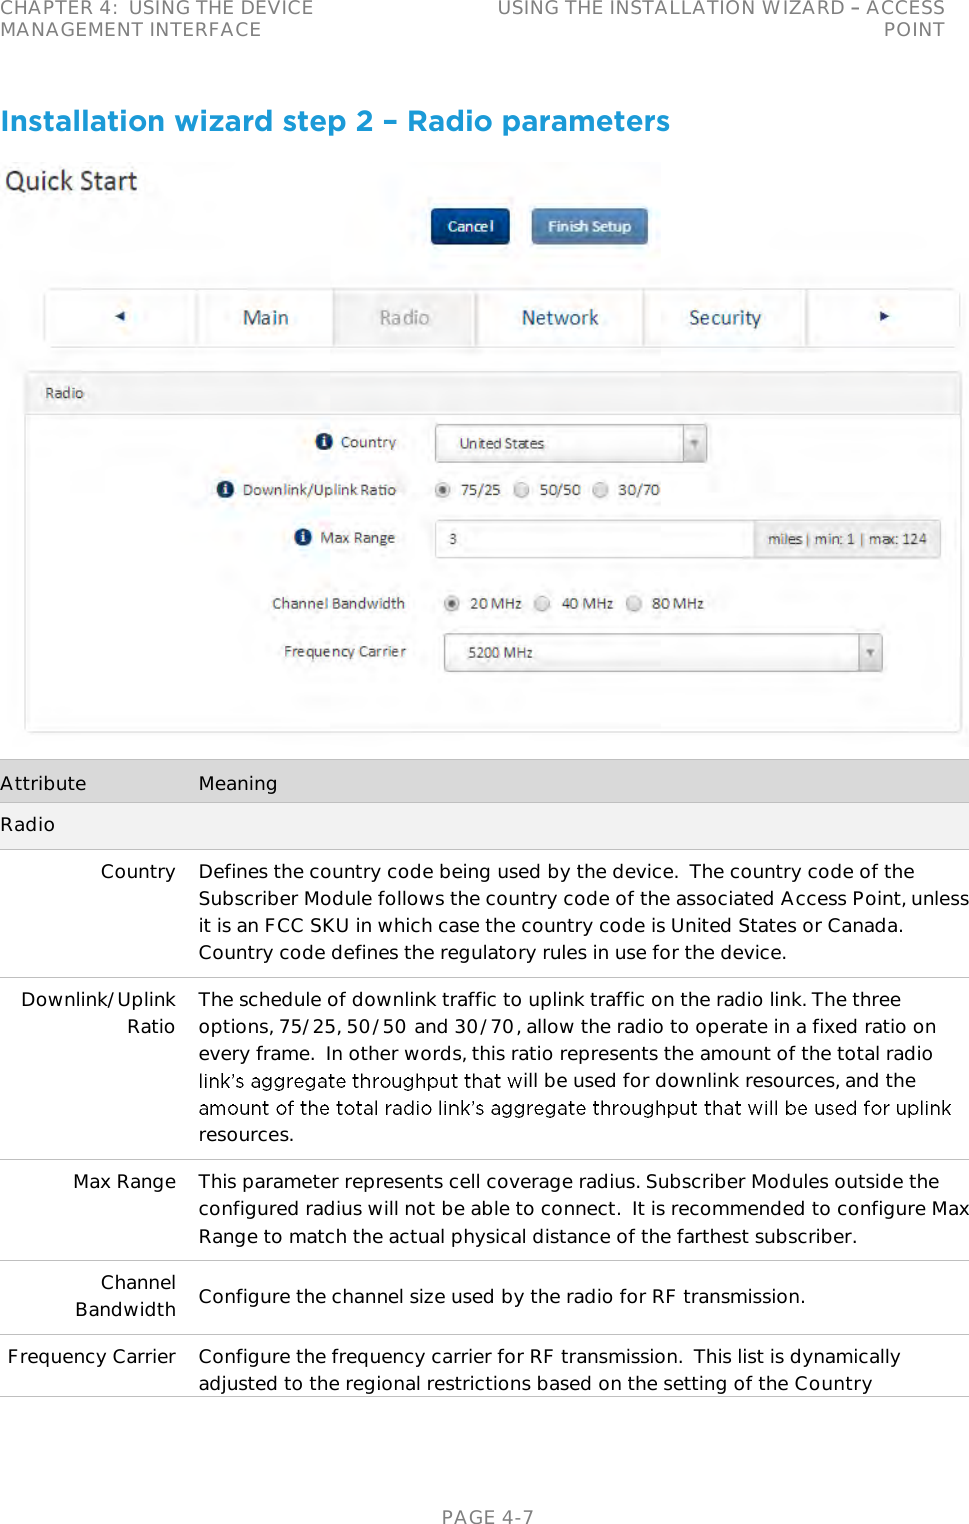 CHAPTER 4:  USING THE DEVICE MANAGEMENT INTERFACE USING THE INSTALLATION WIZARD   ACCESS POINT   PAGE 4-7 Installation wizard step 2 – Radio parameters  Attribute Meaning Radio Country Defines the country code being used by the device.  The country code of the Subscriber Module follows the country code of the associated Access Point, unless it is an FCC SKU in which case the country code is United States or Canada.  Country code defines the regulatory rules in use for the device. Downlink/Uplink Ratio The schedule of downlink traffic to uplink traffic on the radio link. The three options, 75/25, 50/50 and 30/70, allow the radio to operate in a fixed ratio on every frame.  In other words, this ratio represents the amount of the total radio ill be used for downlink resources, and the resources. Max Range This parameter represents cell coverage radius. Subscriber Modules outside the configured radius will not be able to connect.  It is recommended to configure Max Range to match the actual physical distance of the farthest subscriber. Channel Bandwidth Configure the channel size used by the radio for RF transmission.  Frequency Carrier Configure the frequency carrier for RF transmission.  This list is dynamically adjusted to the regional restrictions based on the setting of the Country 